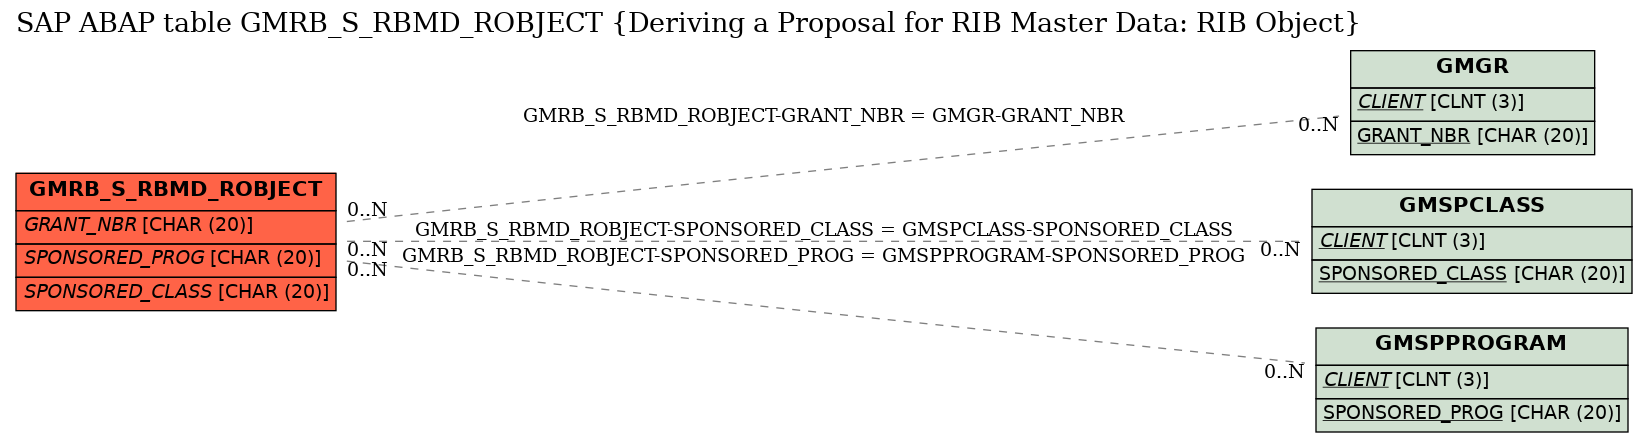 E-R Diagram for table GMRB_S_RBMD_ROBJECT (Deriving a Proposal for RIB Master Data: RIB Object)